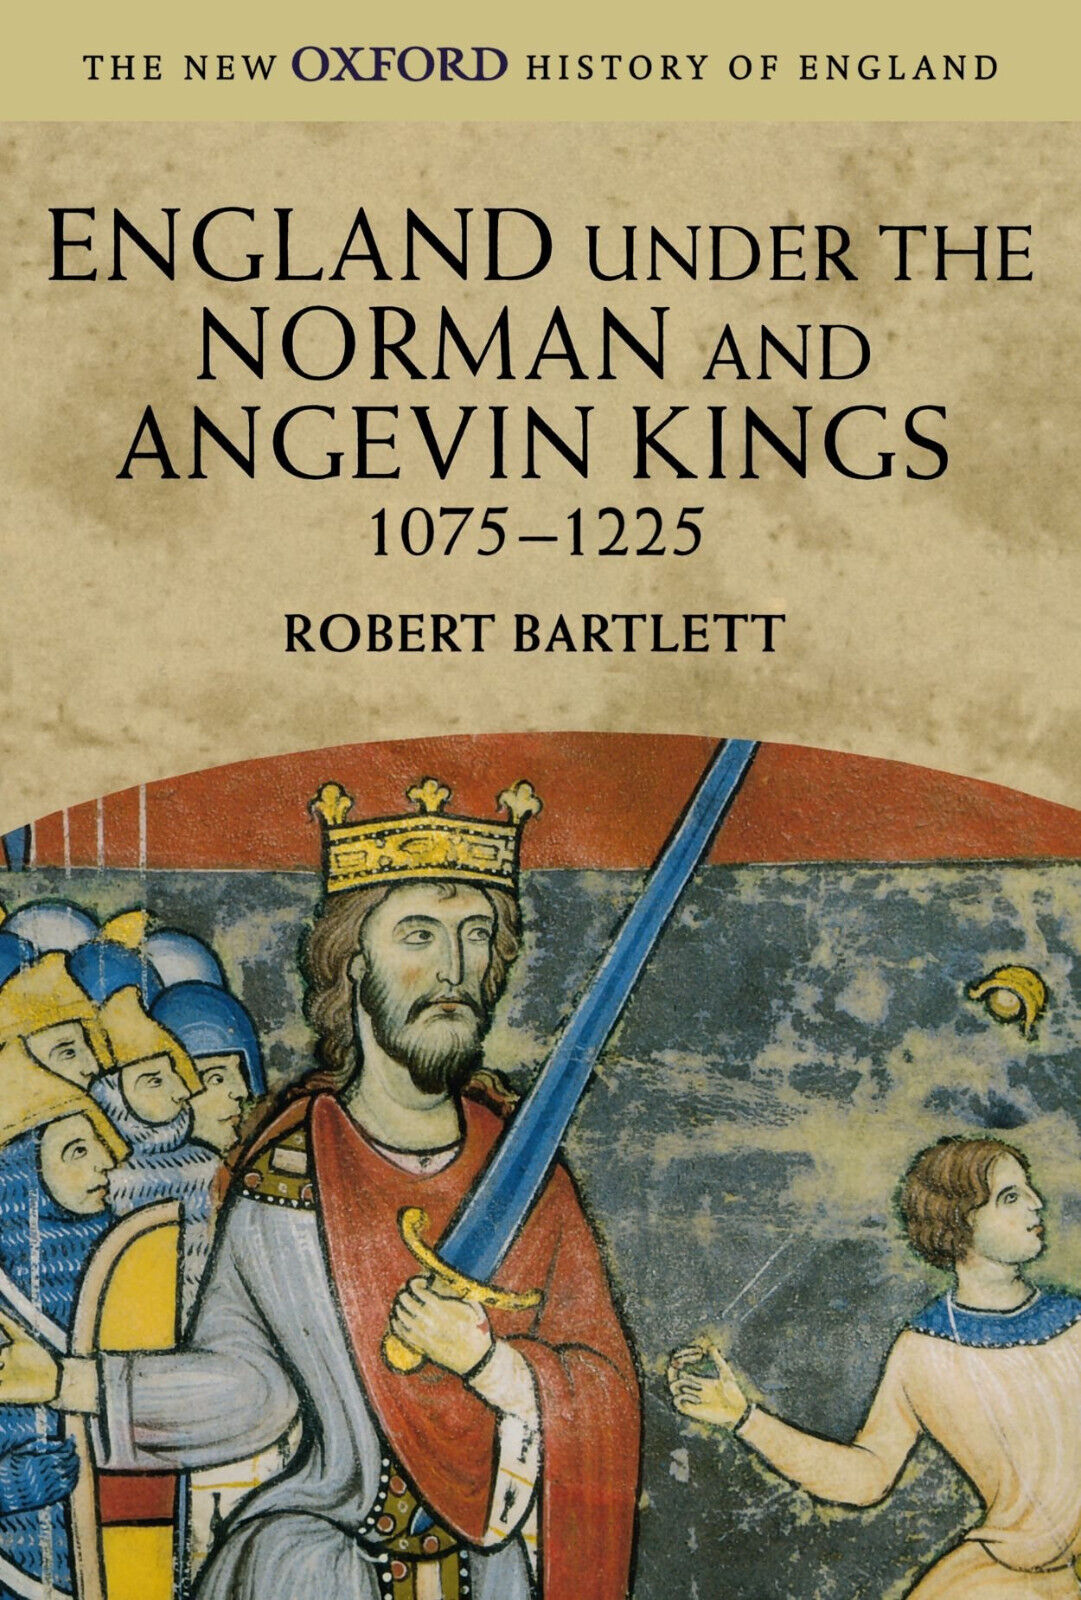 England under the Norman and Angevin Kings - Robert - Oxford, 2003 libro usato